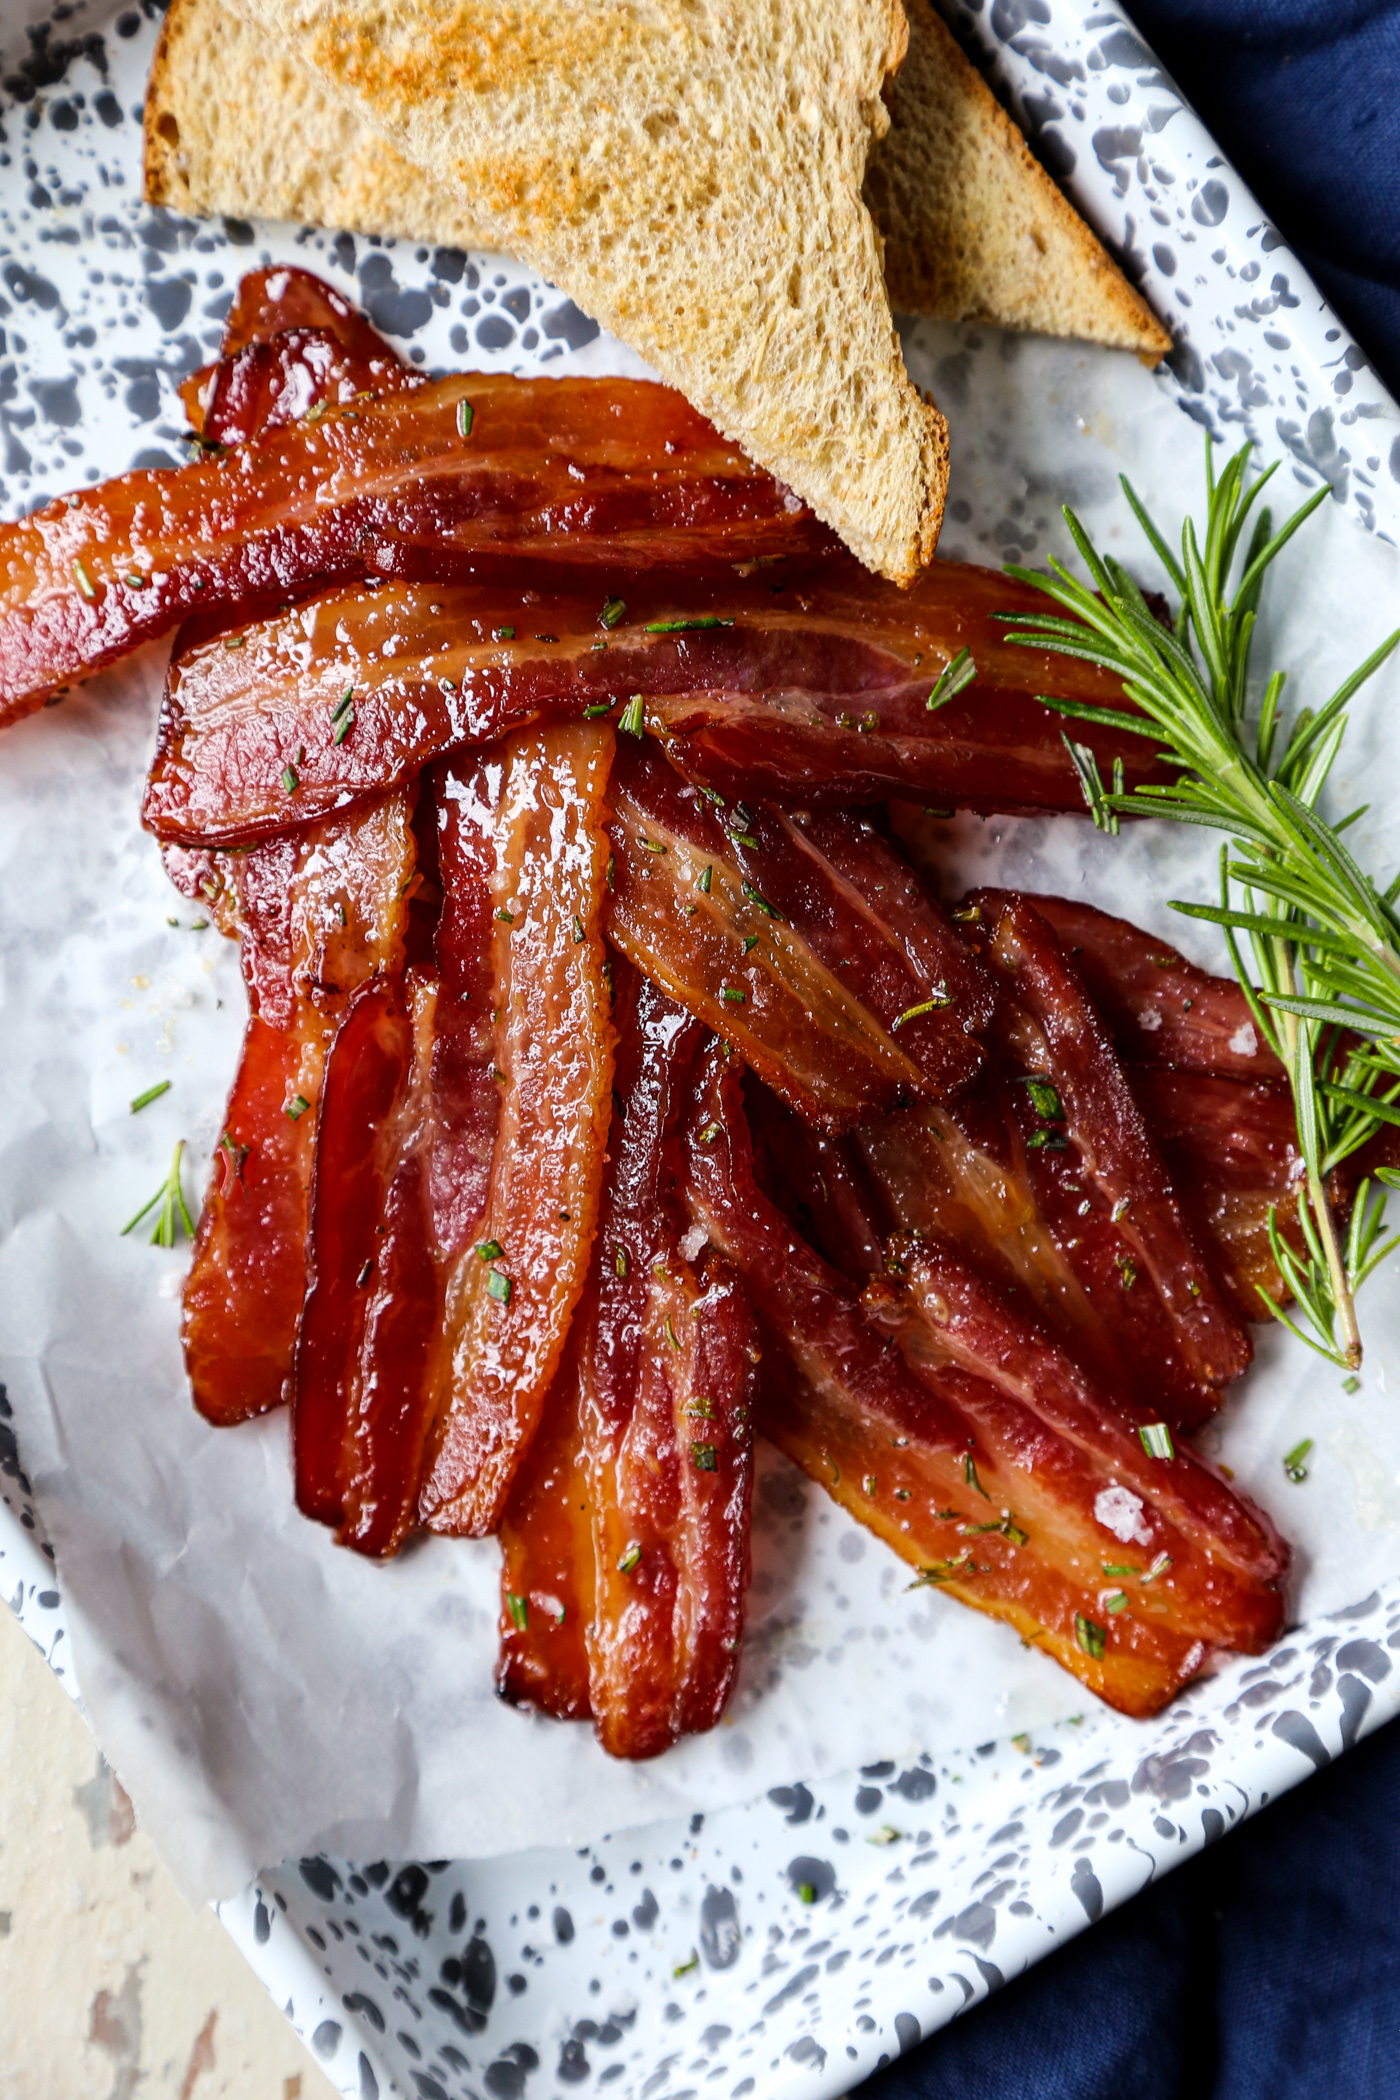 Maple rosemary bacon cooked in the oven on a parchment lined baking sheet with rosemary sprigs and toast